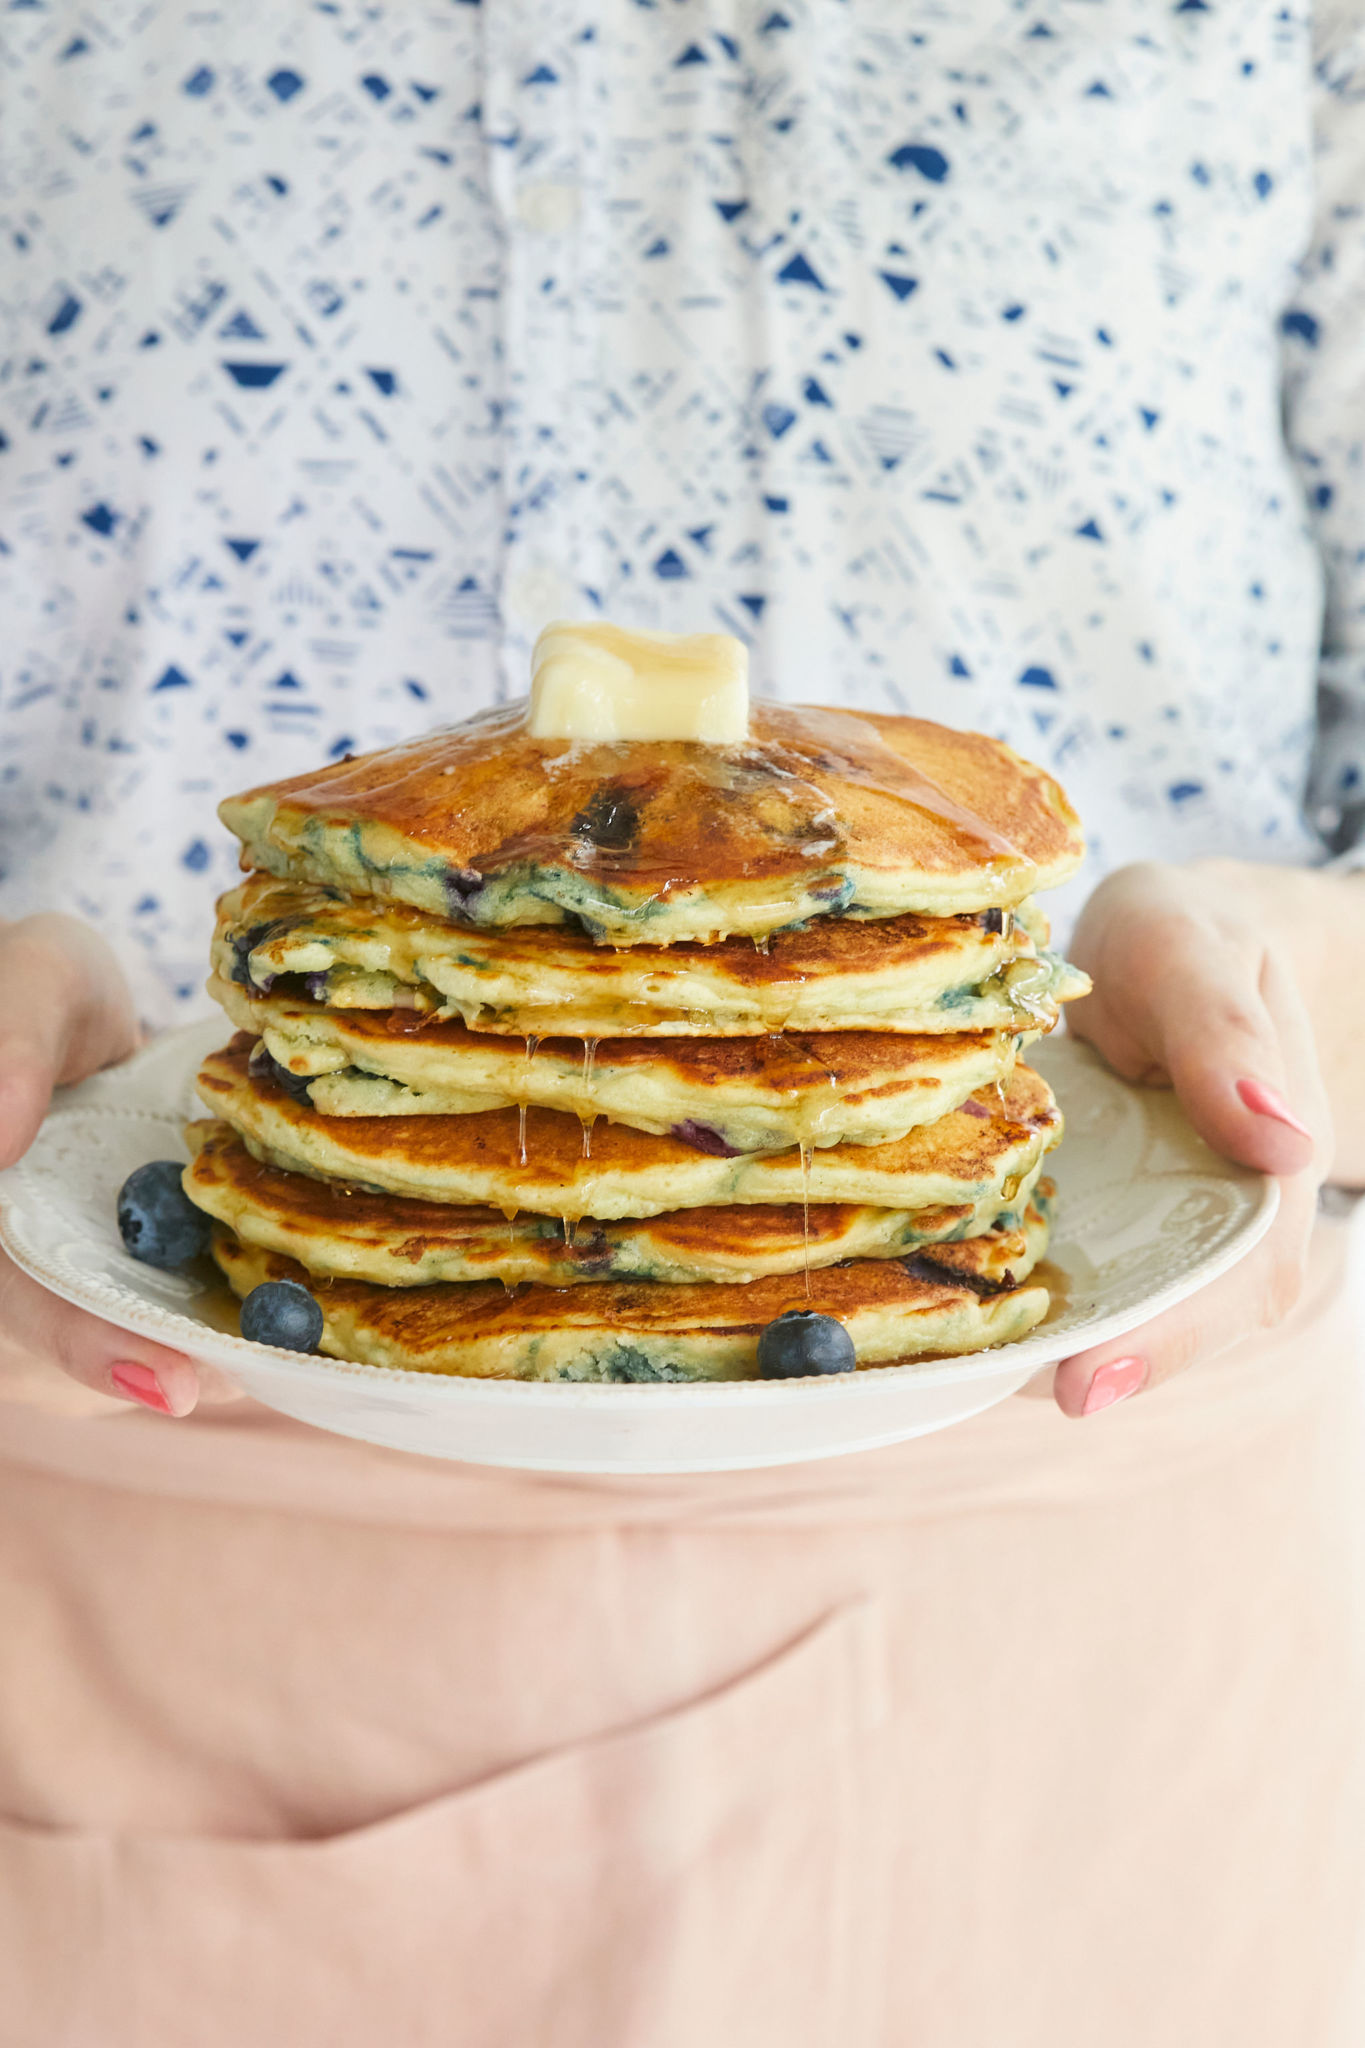 Gemma Stafford holding a stack of her Homemade Blueberry Pancakes recipe.